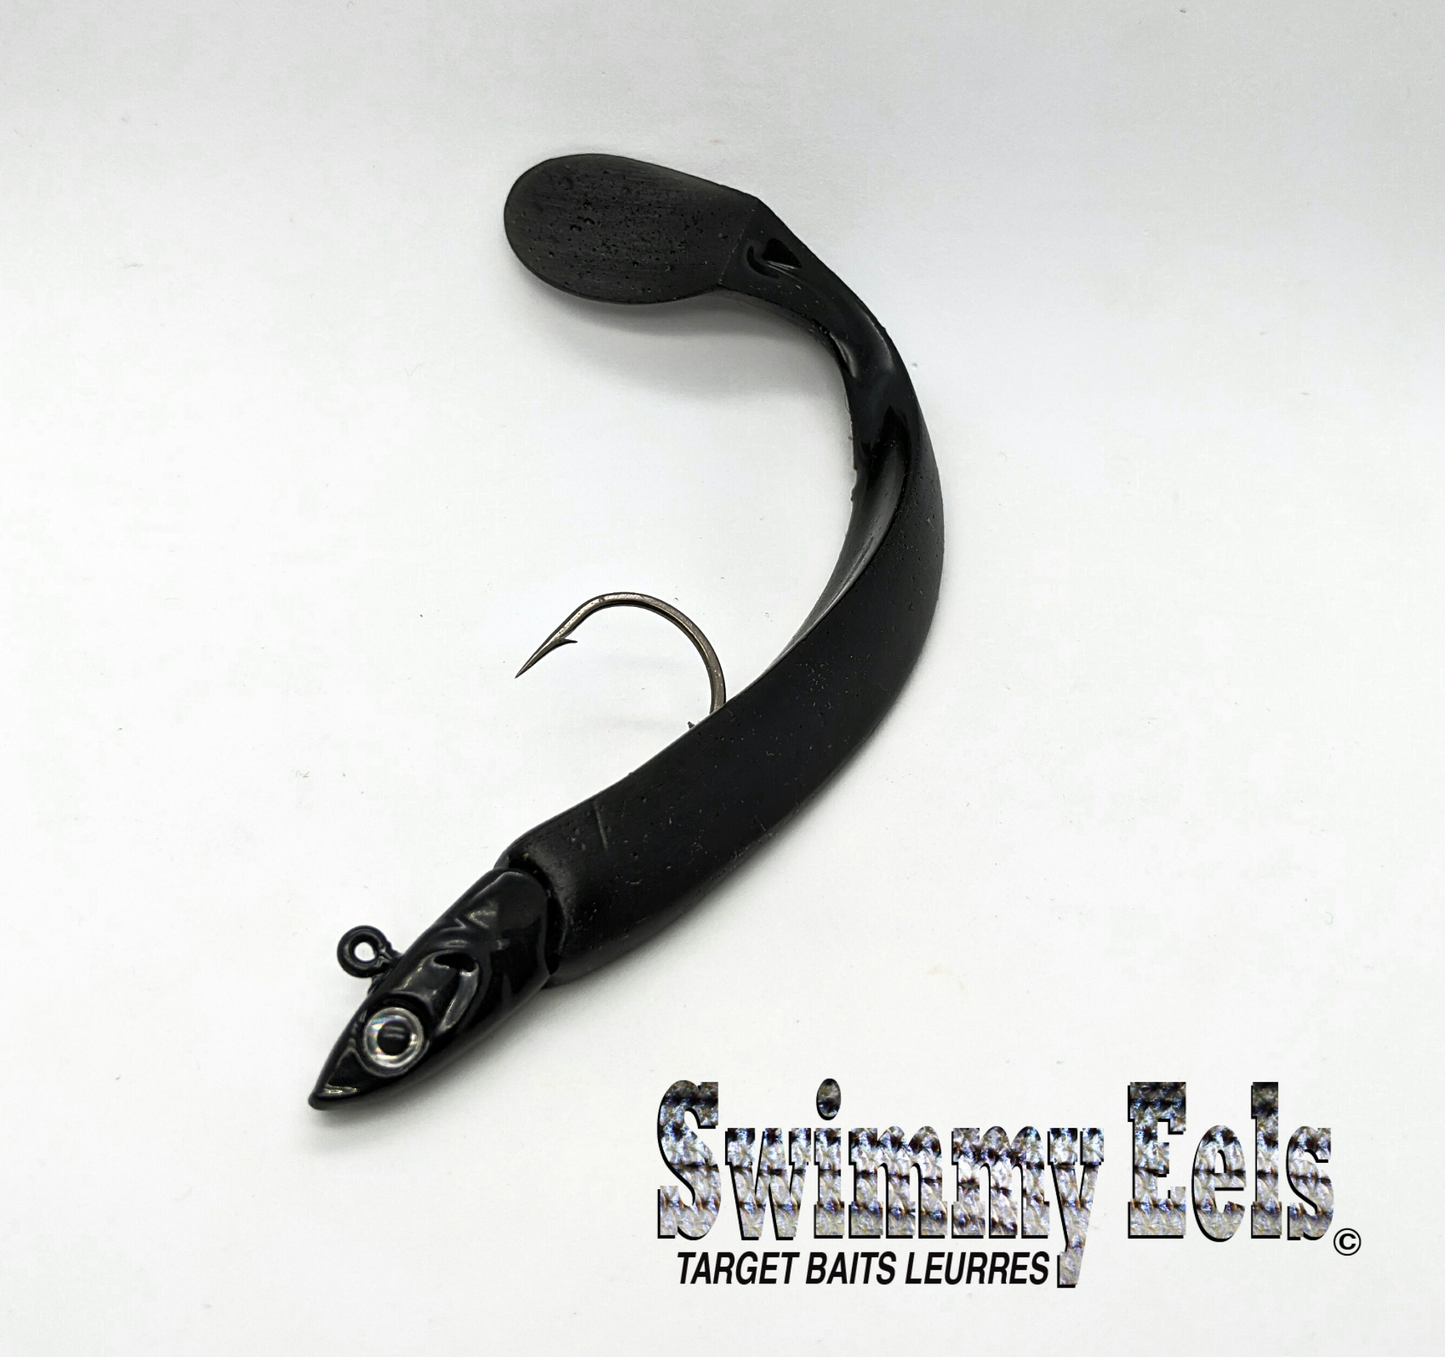 SHARK Balance Jig PIKE, 20gr, 62mm,attractive and realistic bait